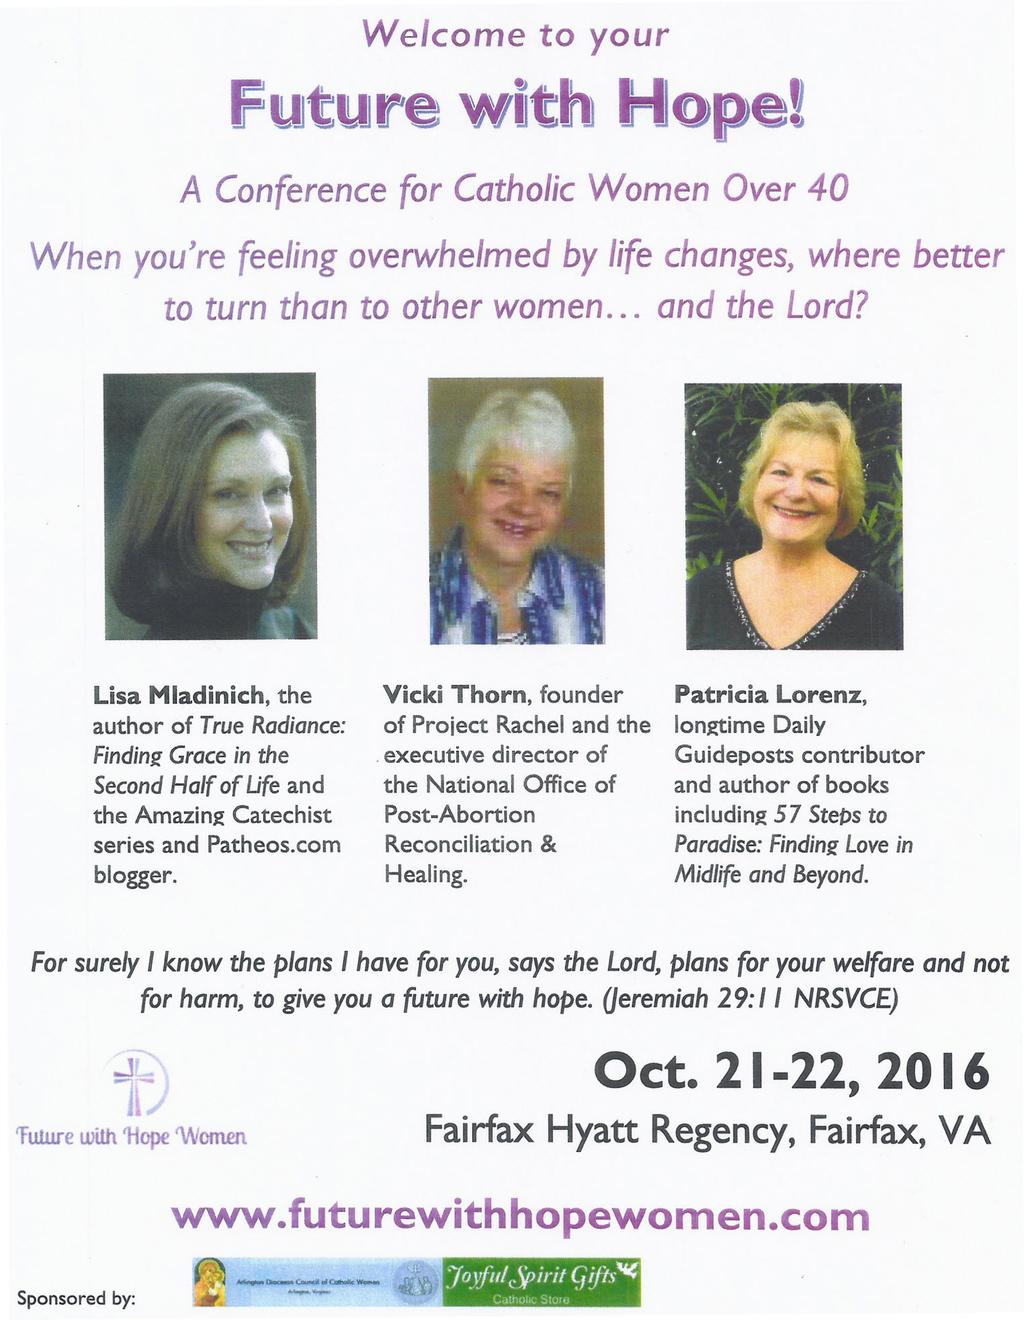 Welcome to your Future with Hope! A Conference for Catholic Women Over 40 When you're feeling overwhelmed by life changes, where better to turn than to other women... and the Lord?